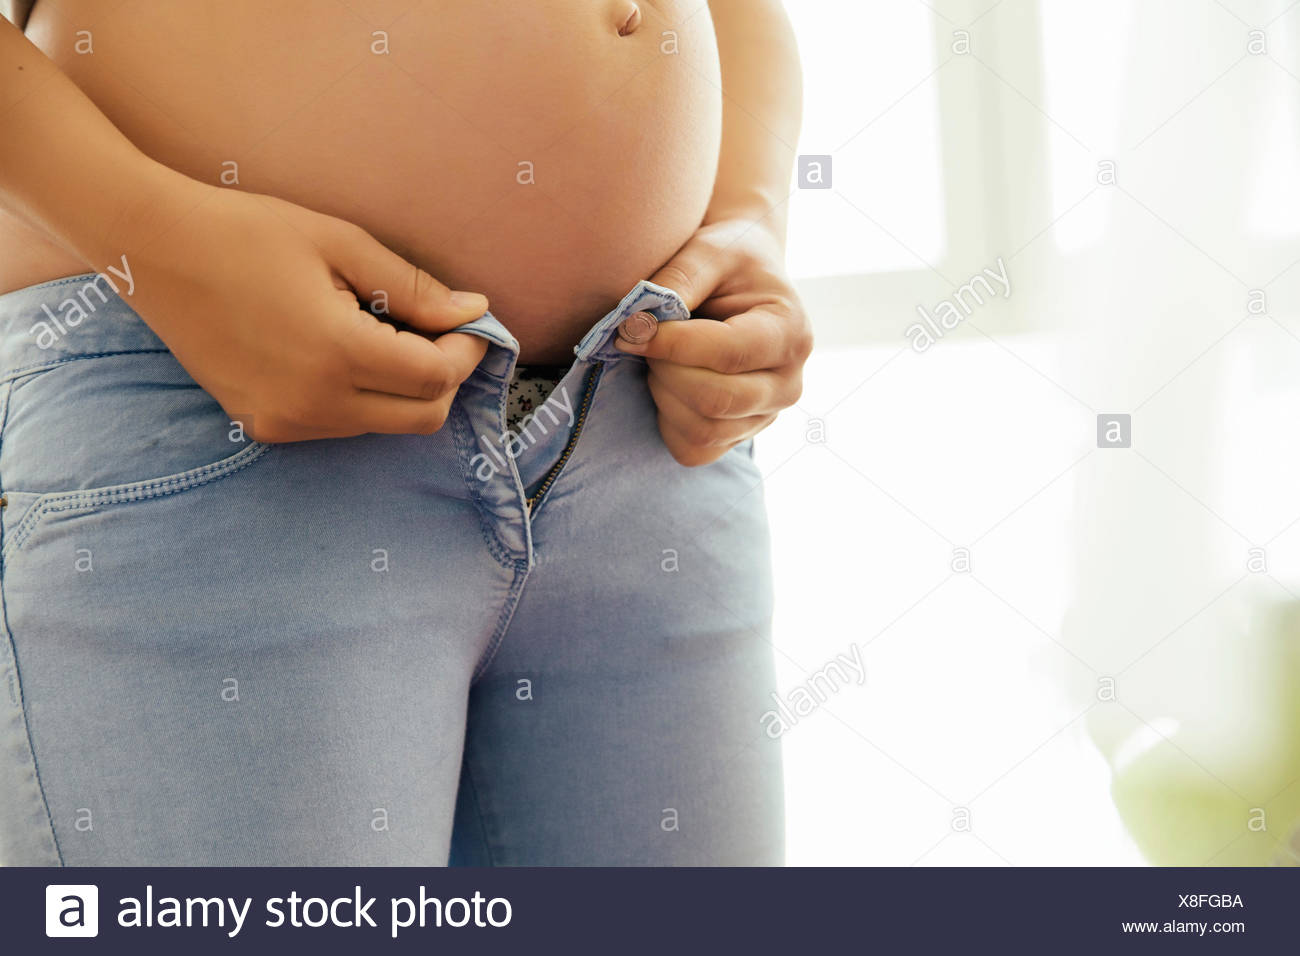 jeans belly button